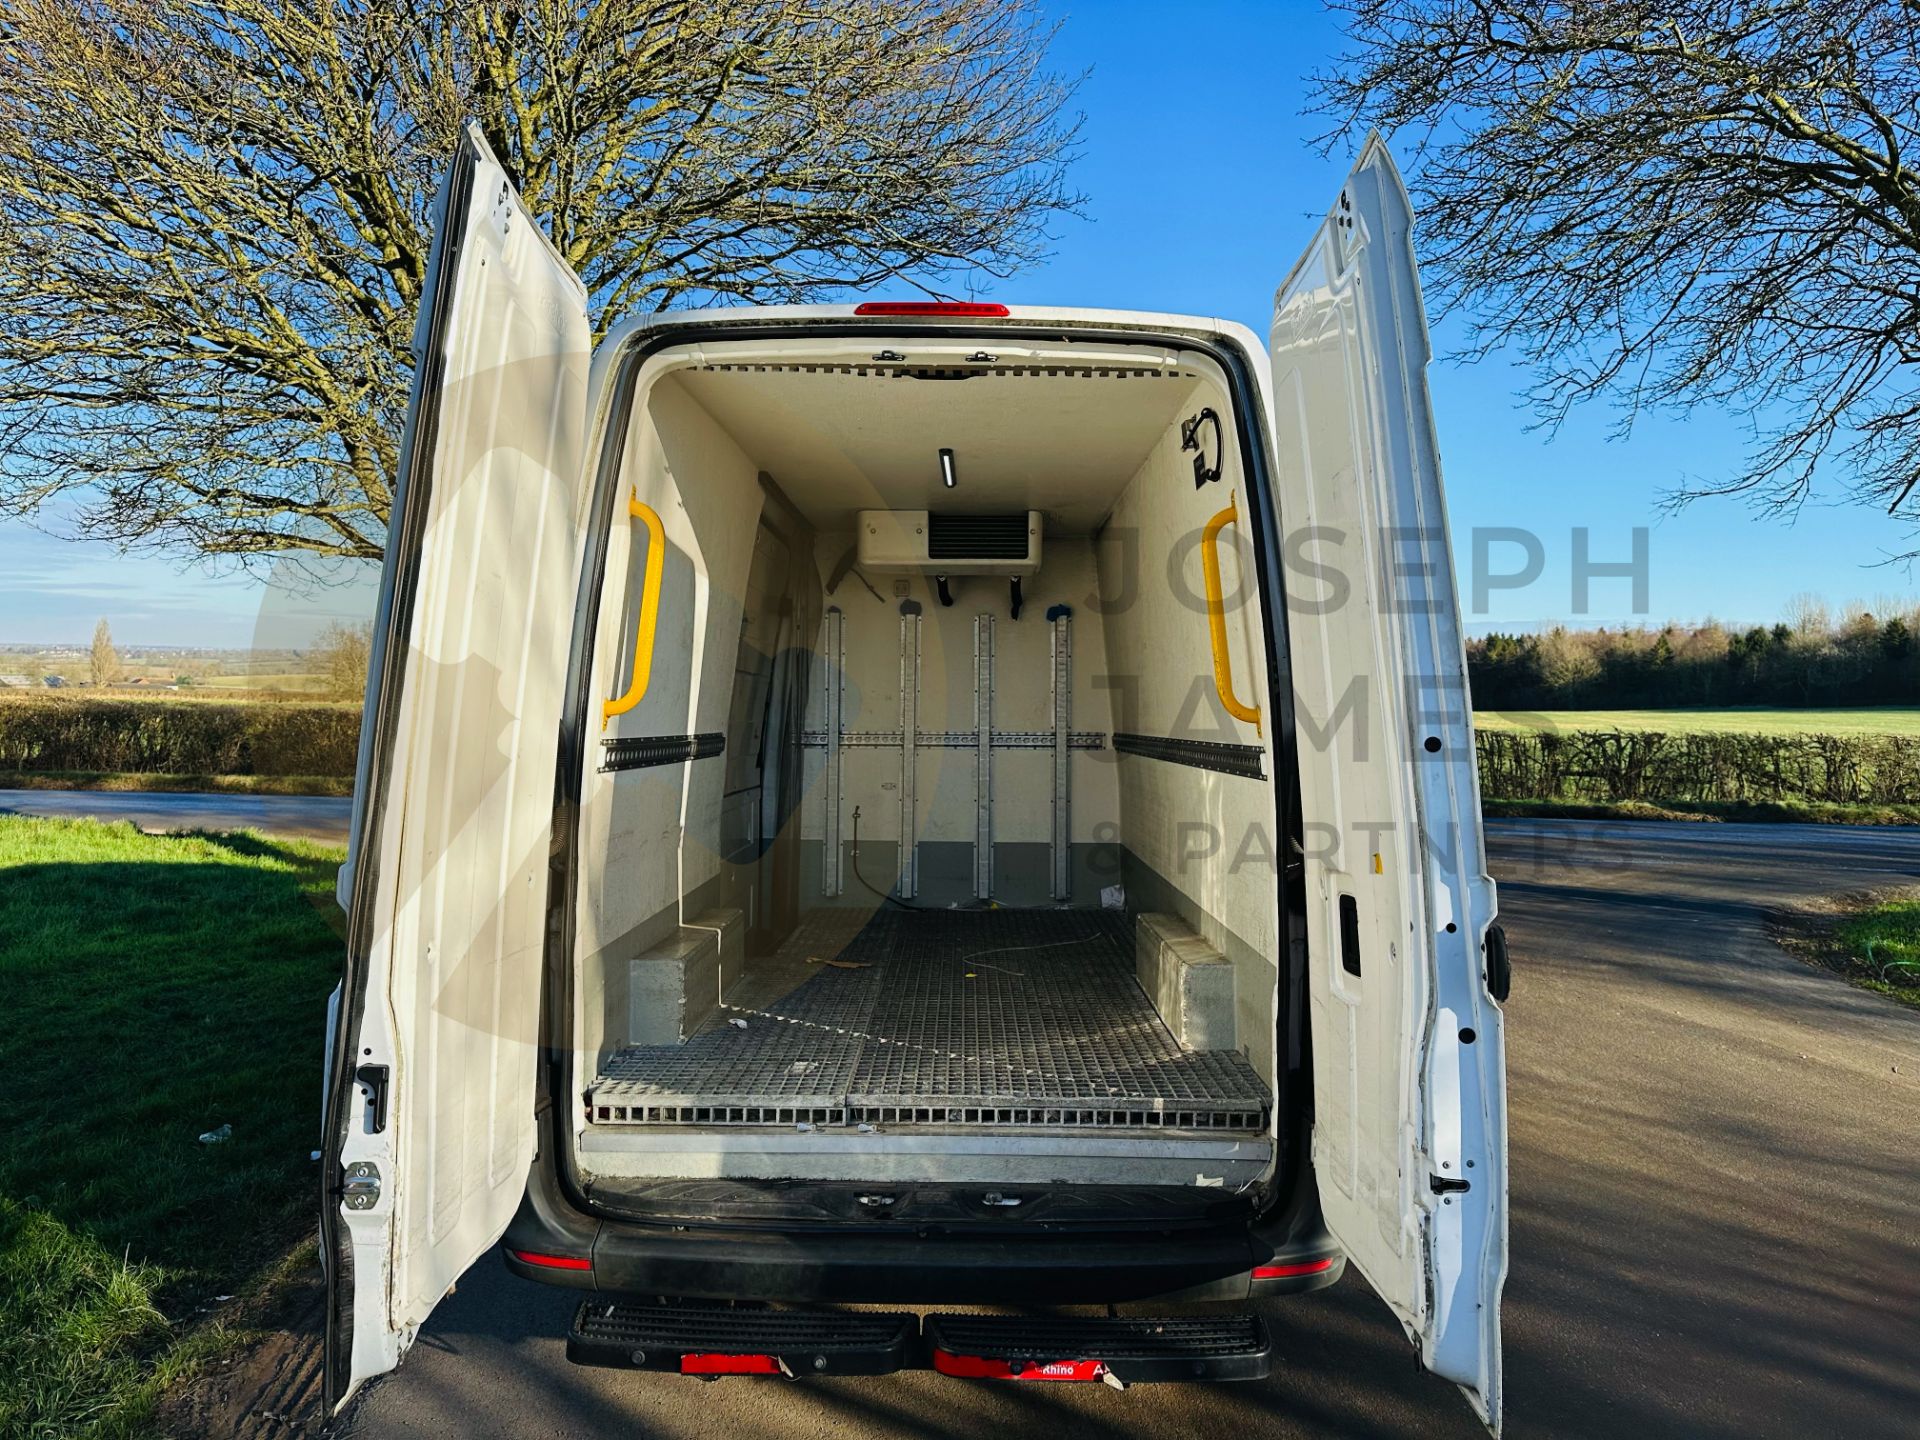 MERCEDES-BENZ SPRINTER 314 CDI *MWB - REFRIGERATED VAN* (2019 - FACELIFT MODEL) *AIR CONDITIONING* - Image 10 of 30